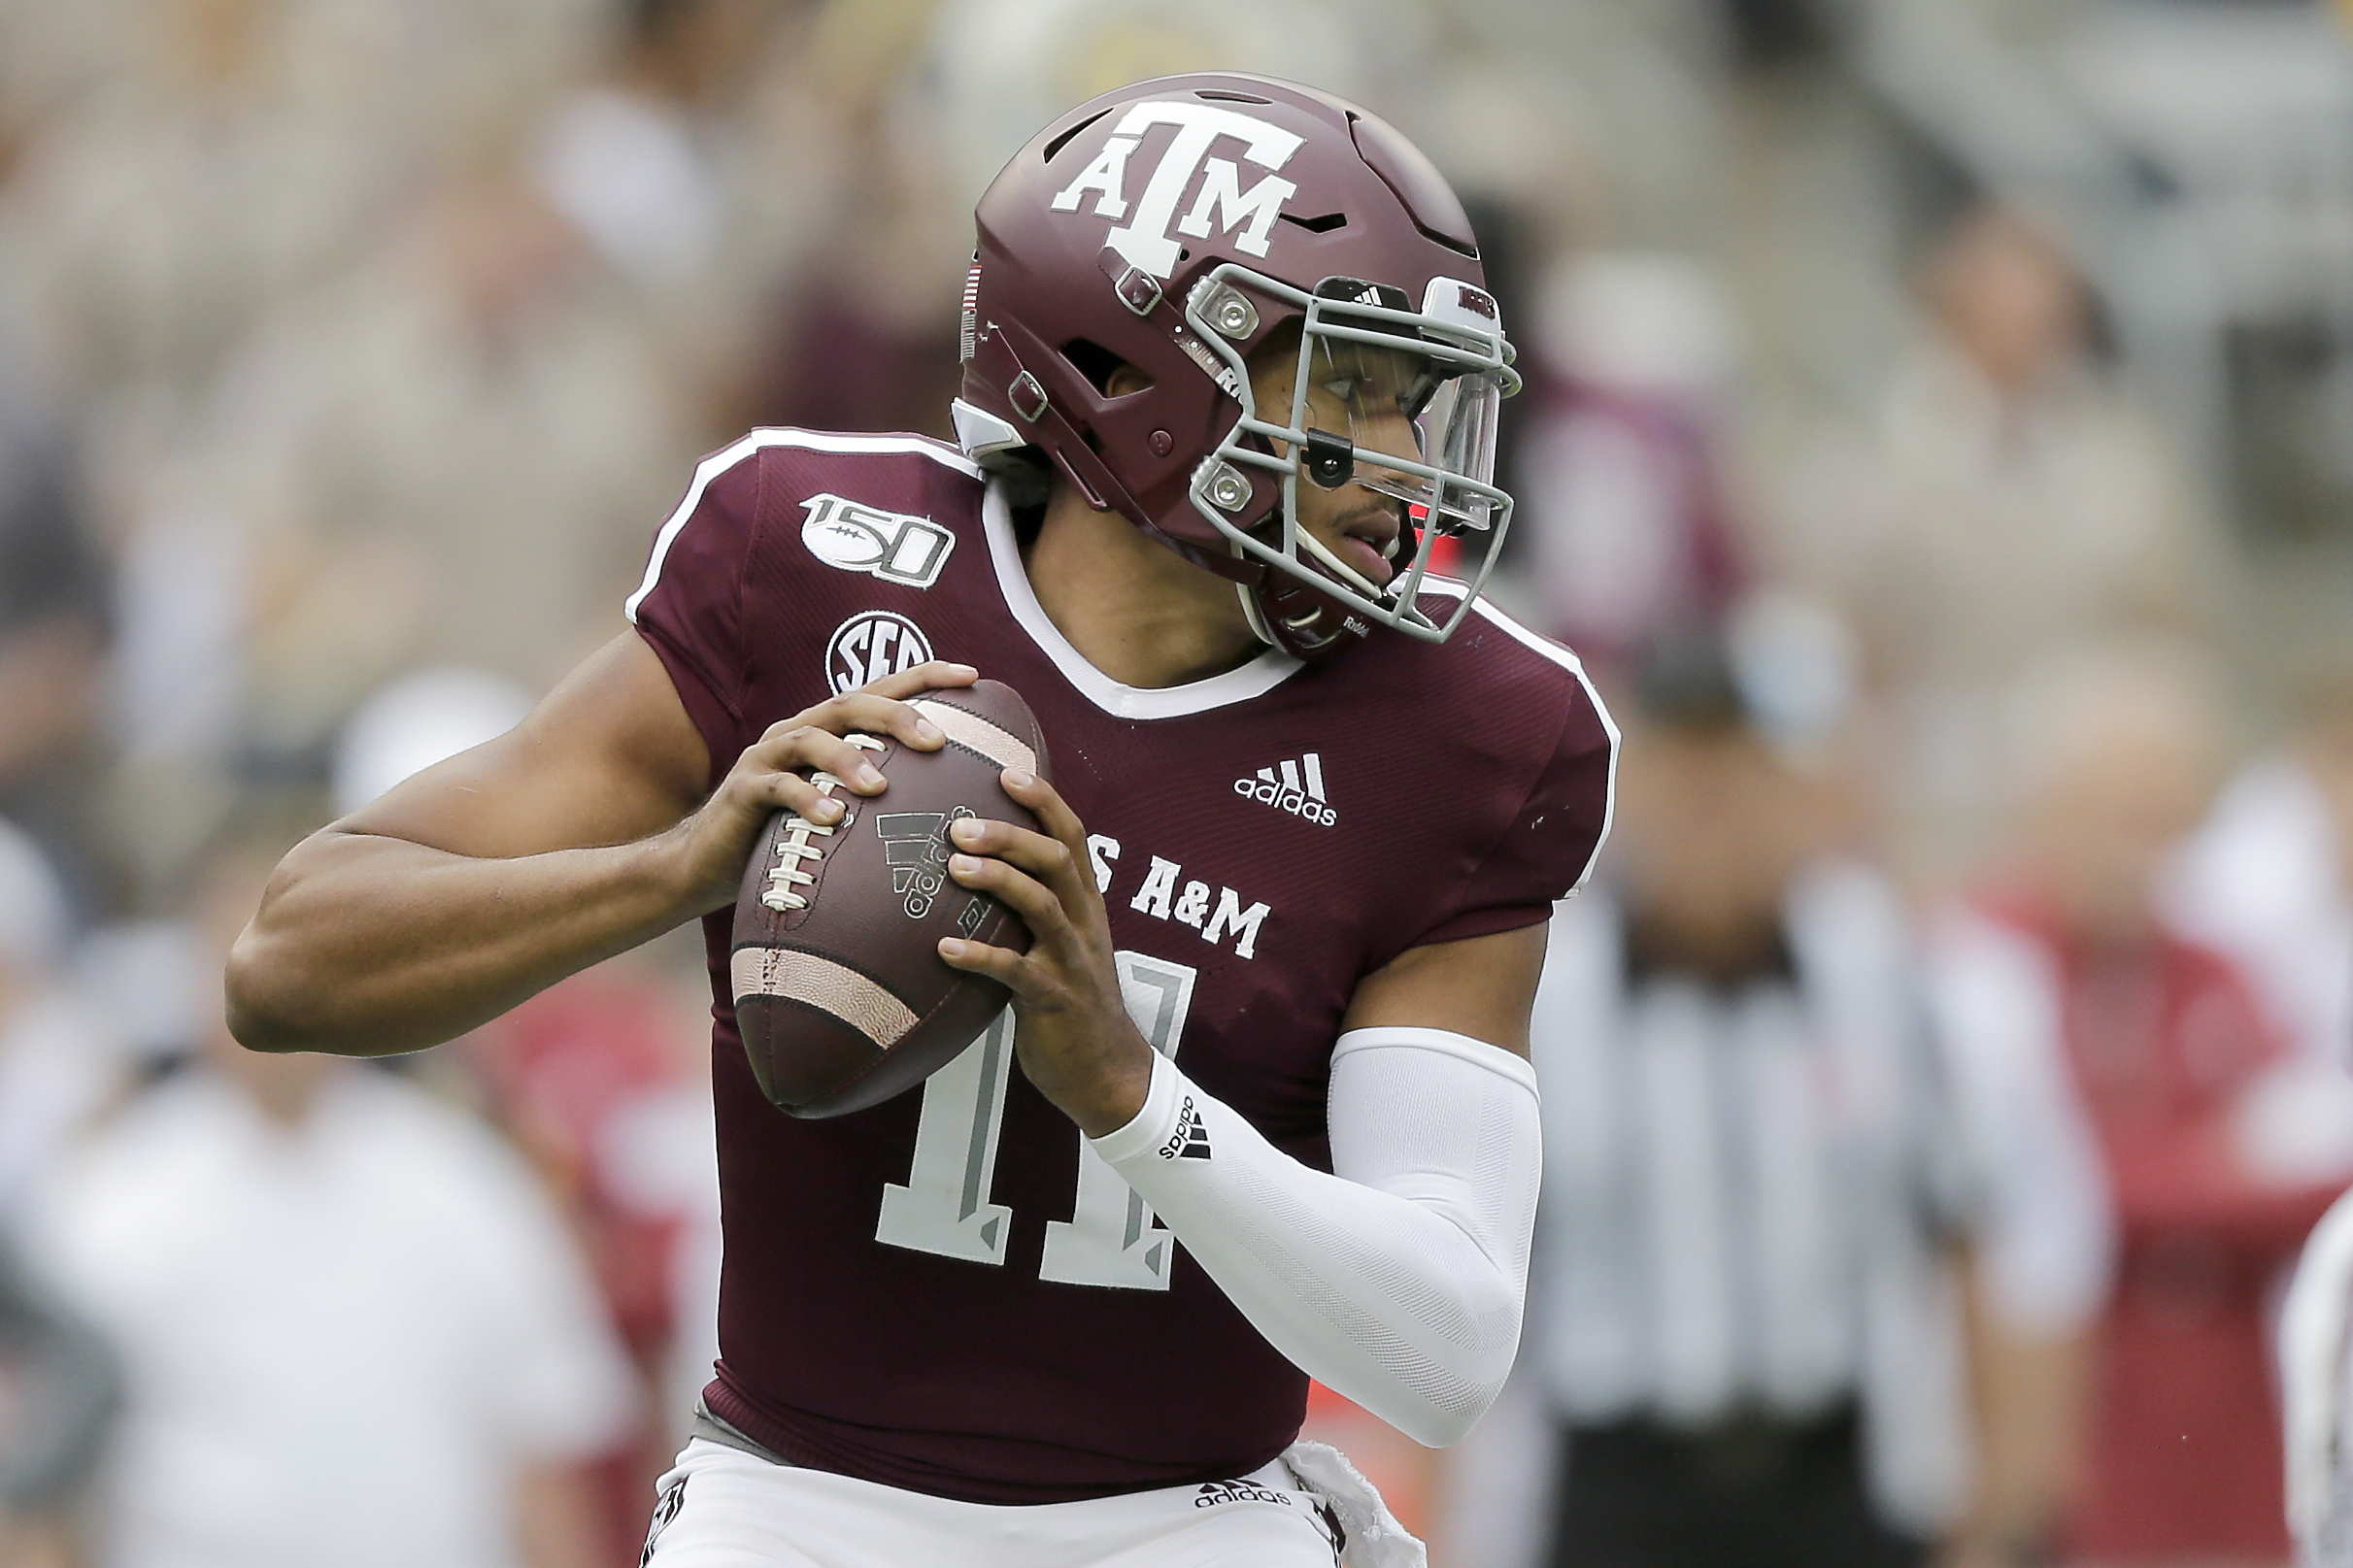 At 3-3, Texas A&M and Fisher stuck in neutral